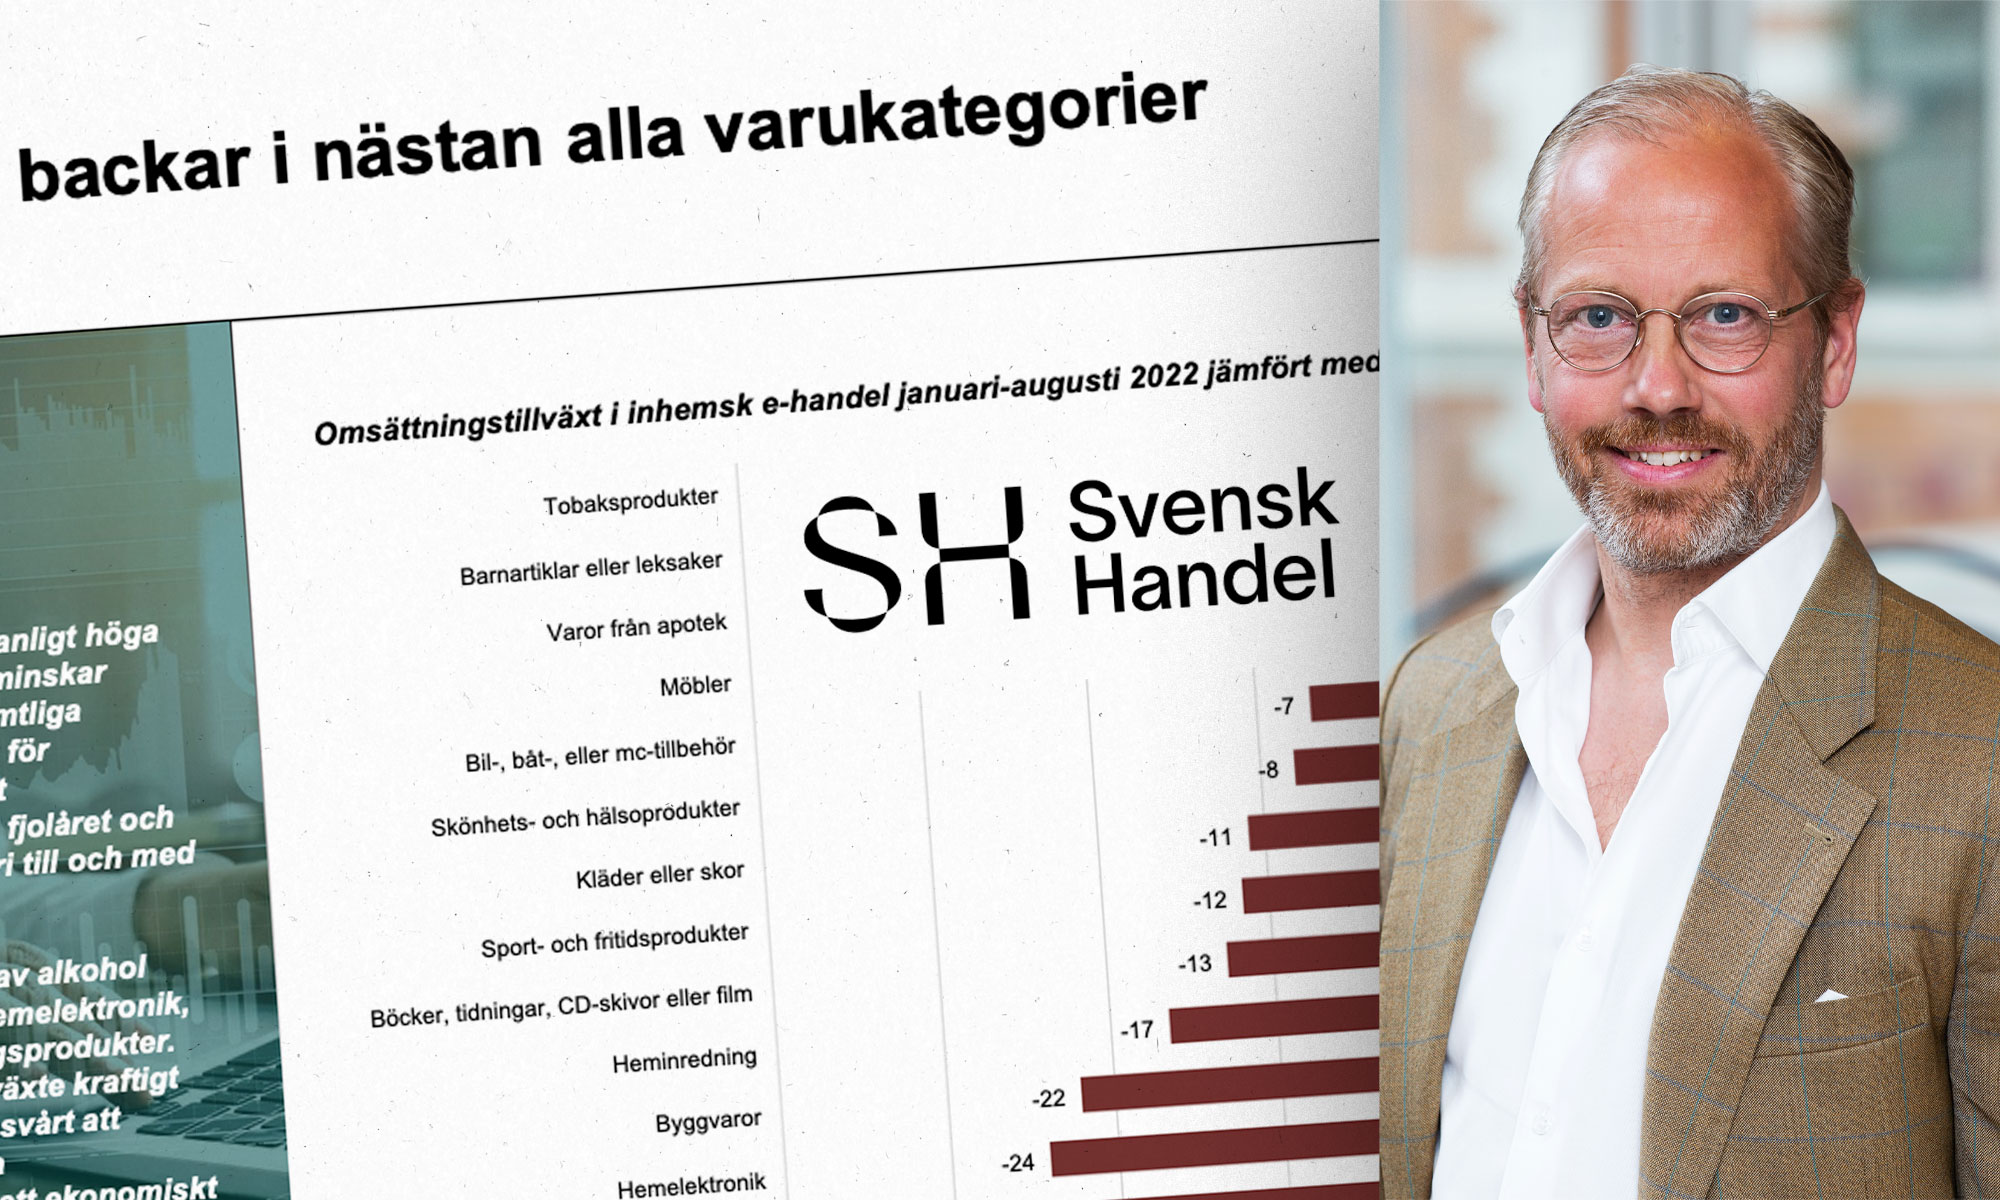 The nicotine segment is growing in a declining E-commerce environment – Svensk E-handel report